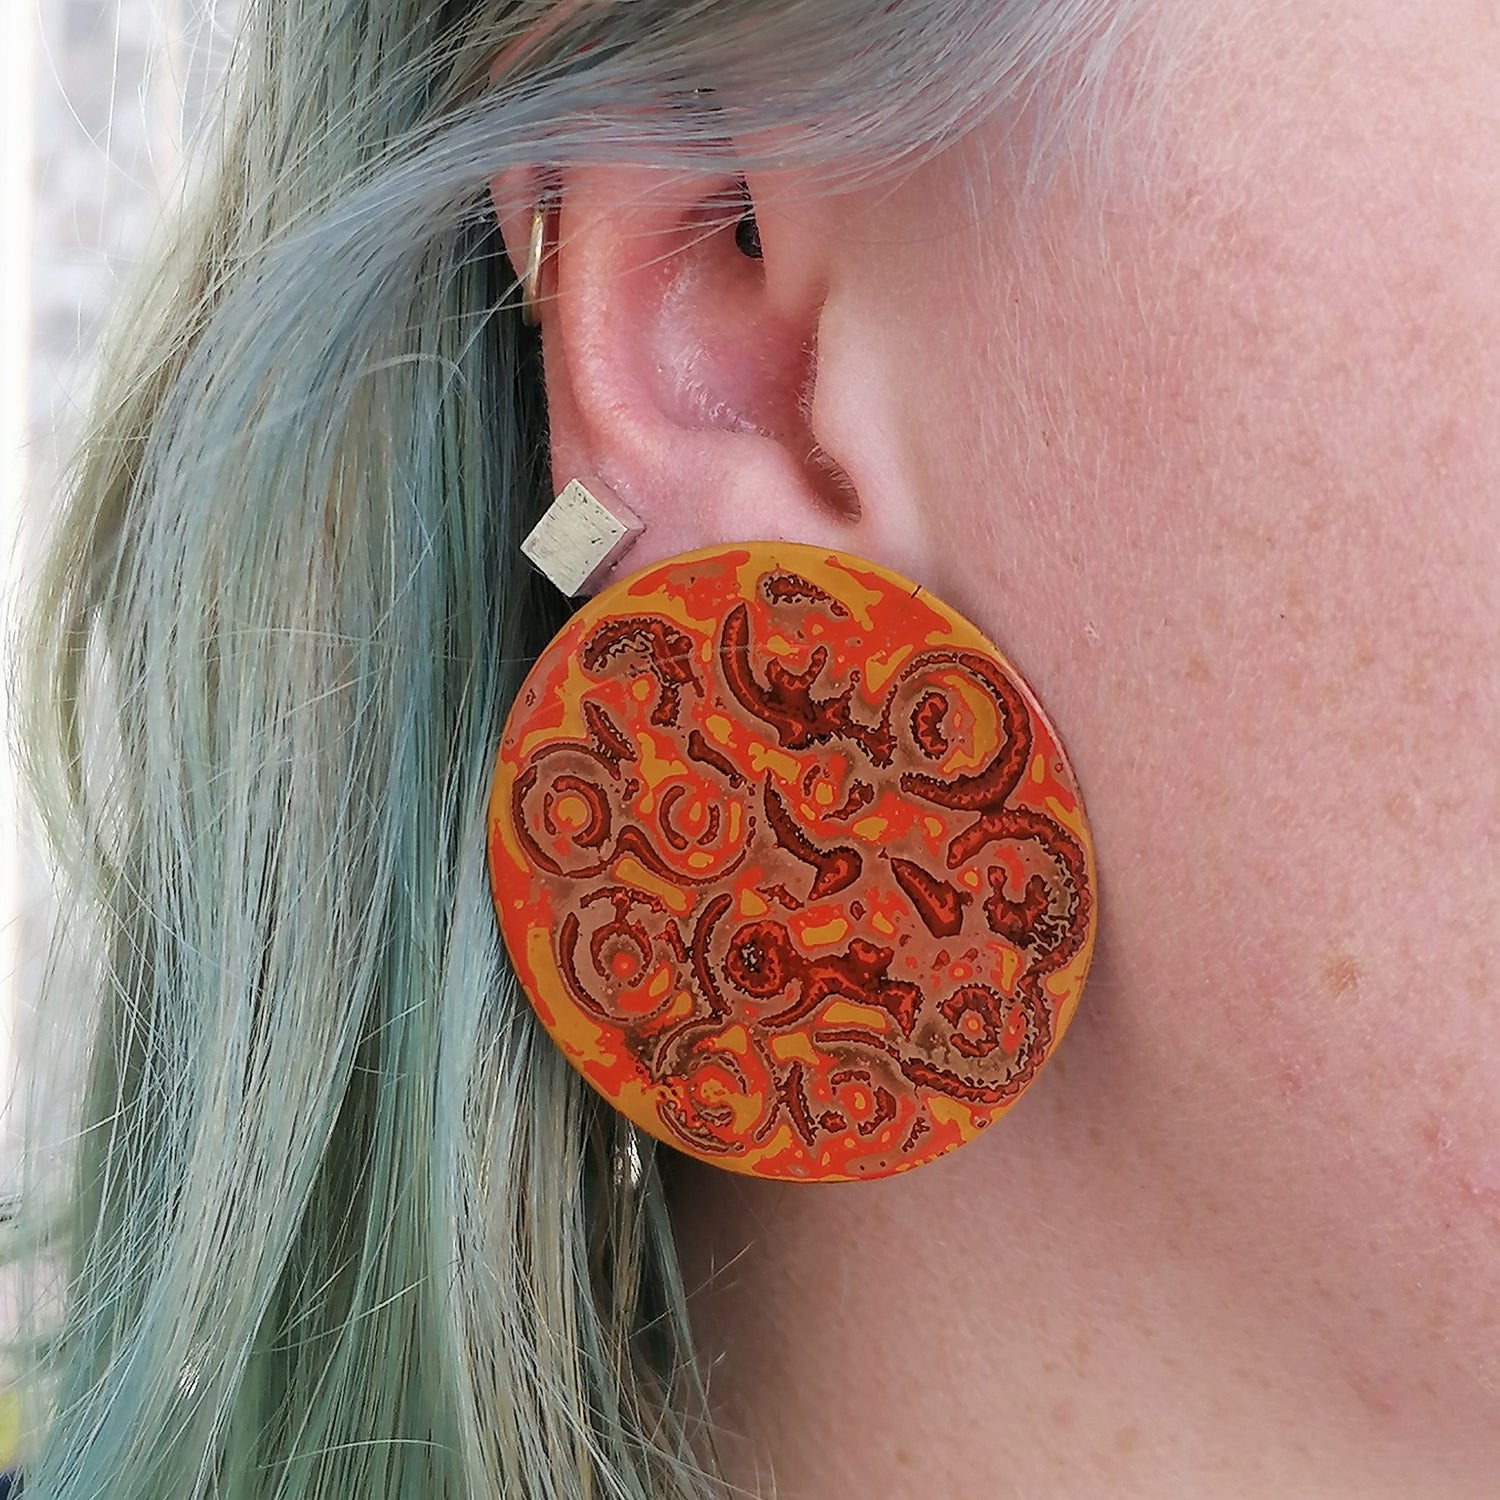 Image shows a statement earring being modeled by a model with blue hair. Pattern consists of circles in orange, brown, yellow and a pale pink.